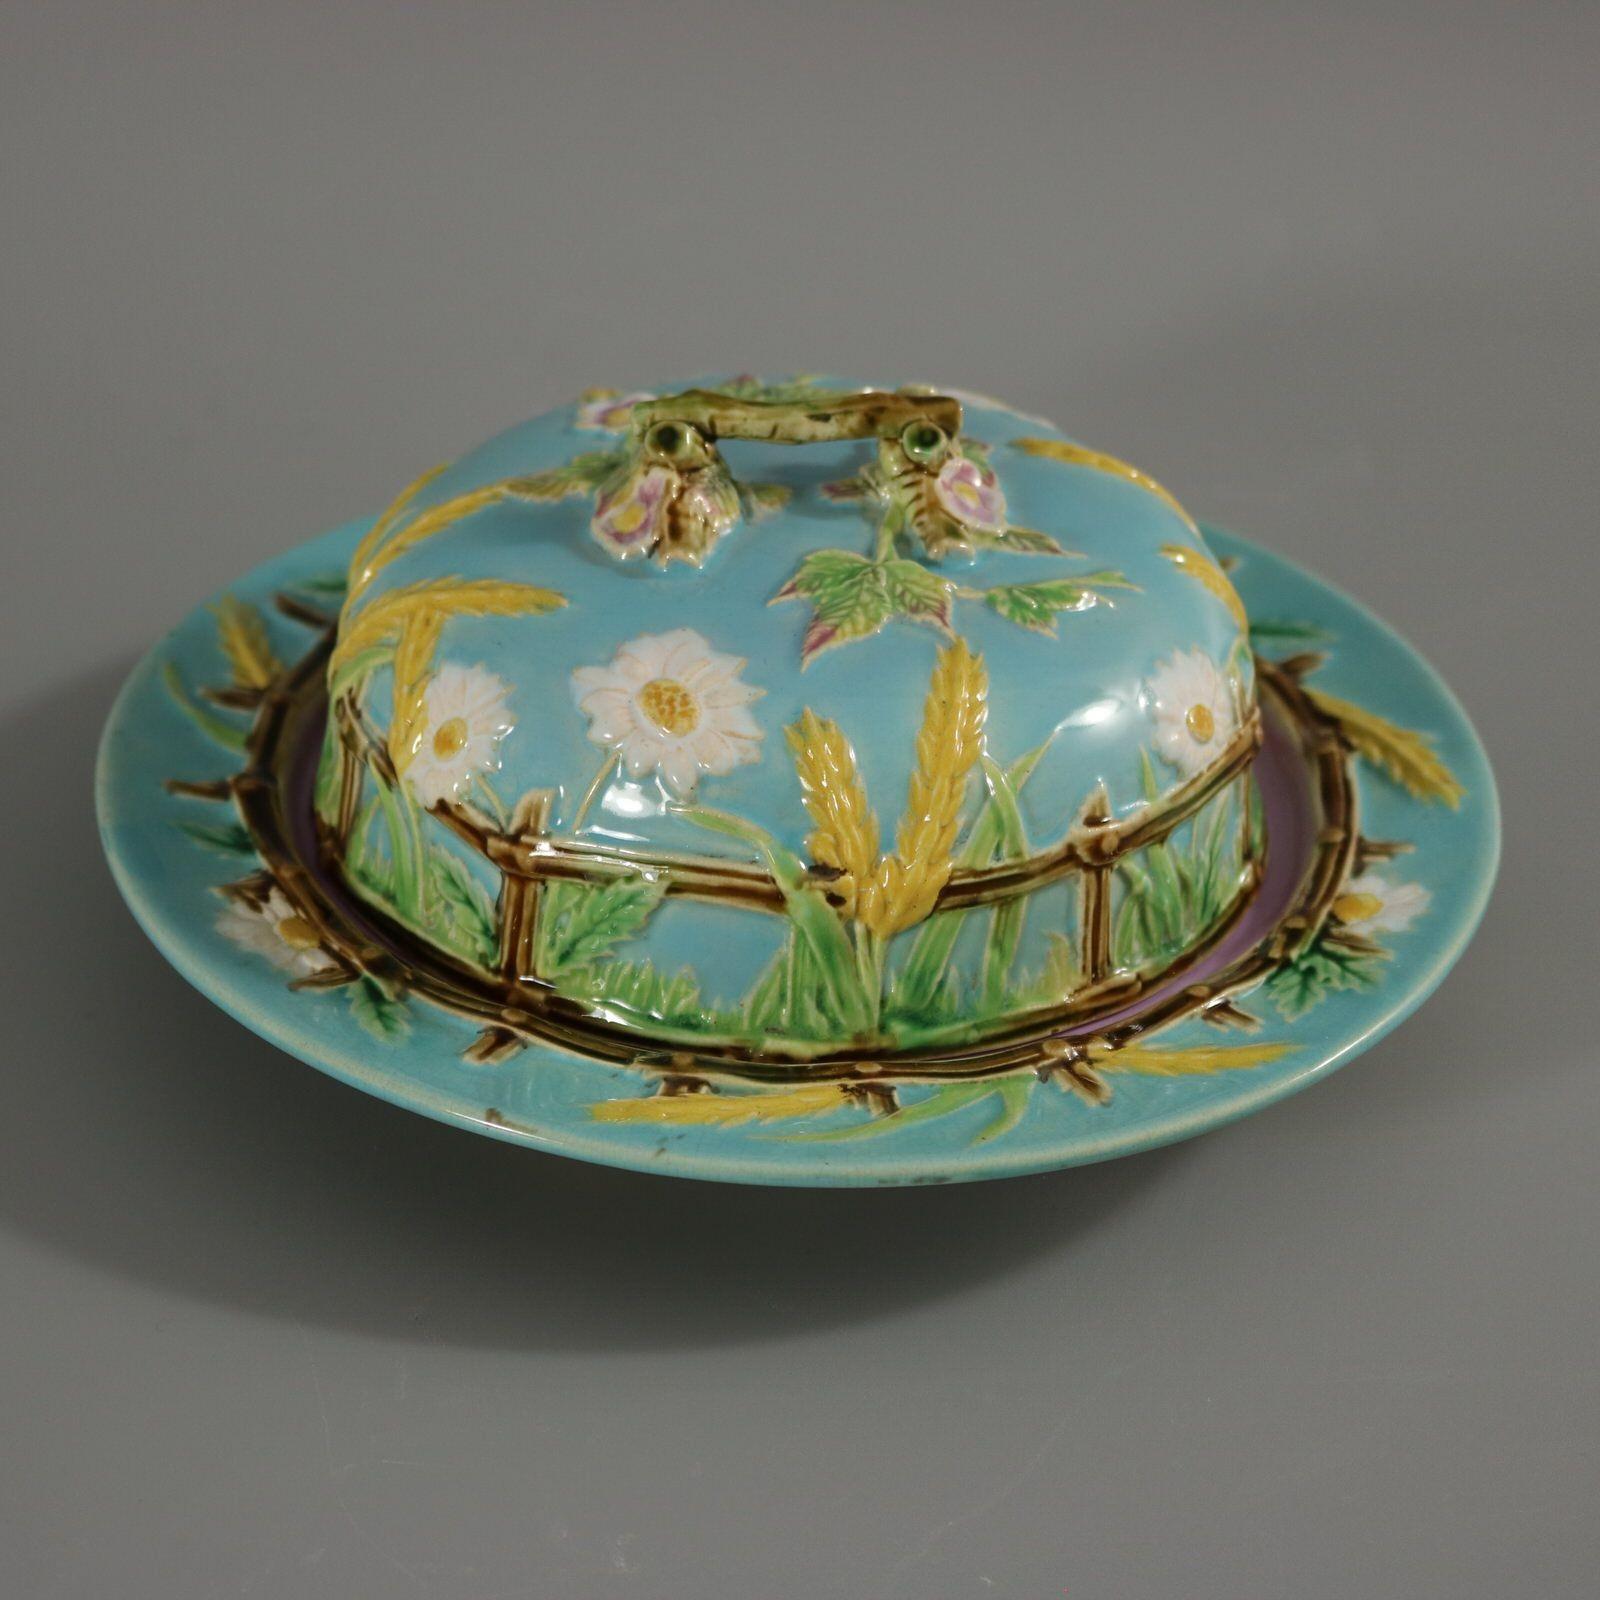 Late 19th Century George Jones Majolica Muffin Dish and Cover For Sale